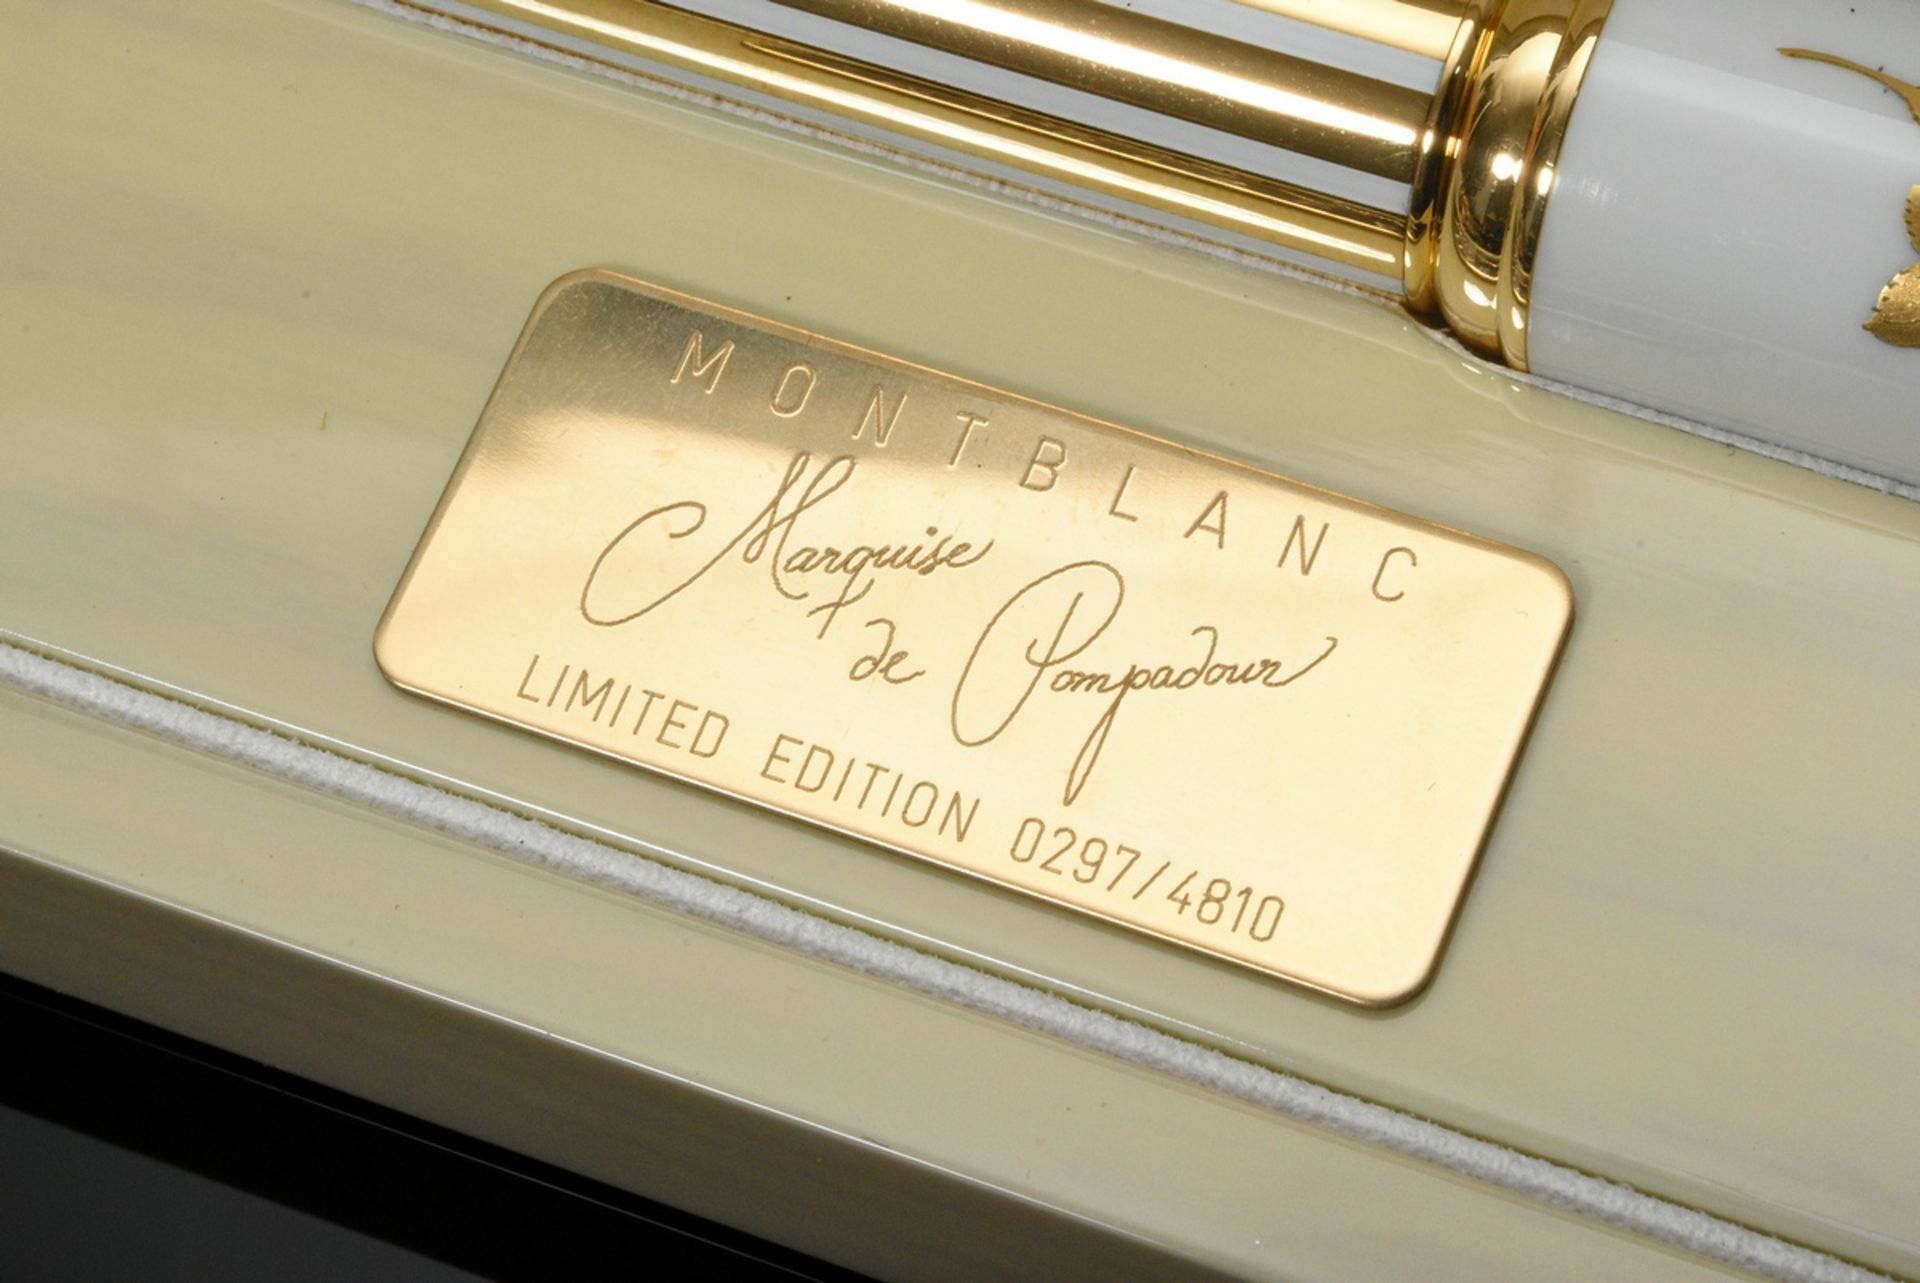 Montblanc piston fountain pen "Marquise de Pompadour" from the special edition "Patron of Art", gol - Image 3 of 7